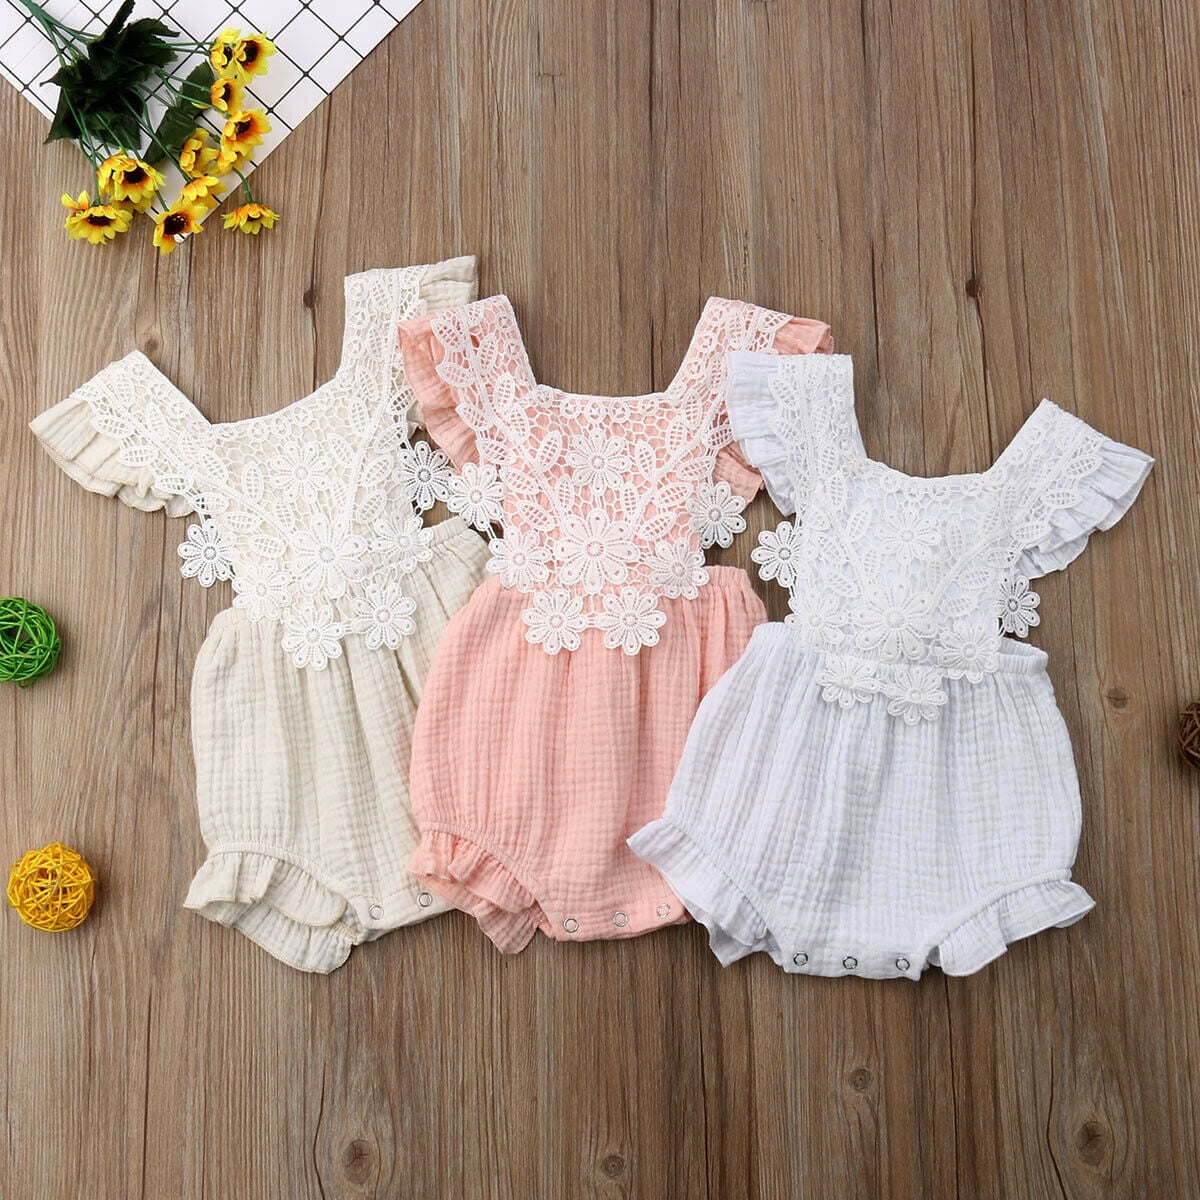 Newborn Baby Girl Clothes Lace Floral Romper Backless Bodysuit Photo Prop KI 